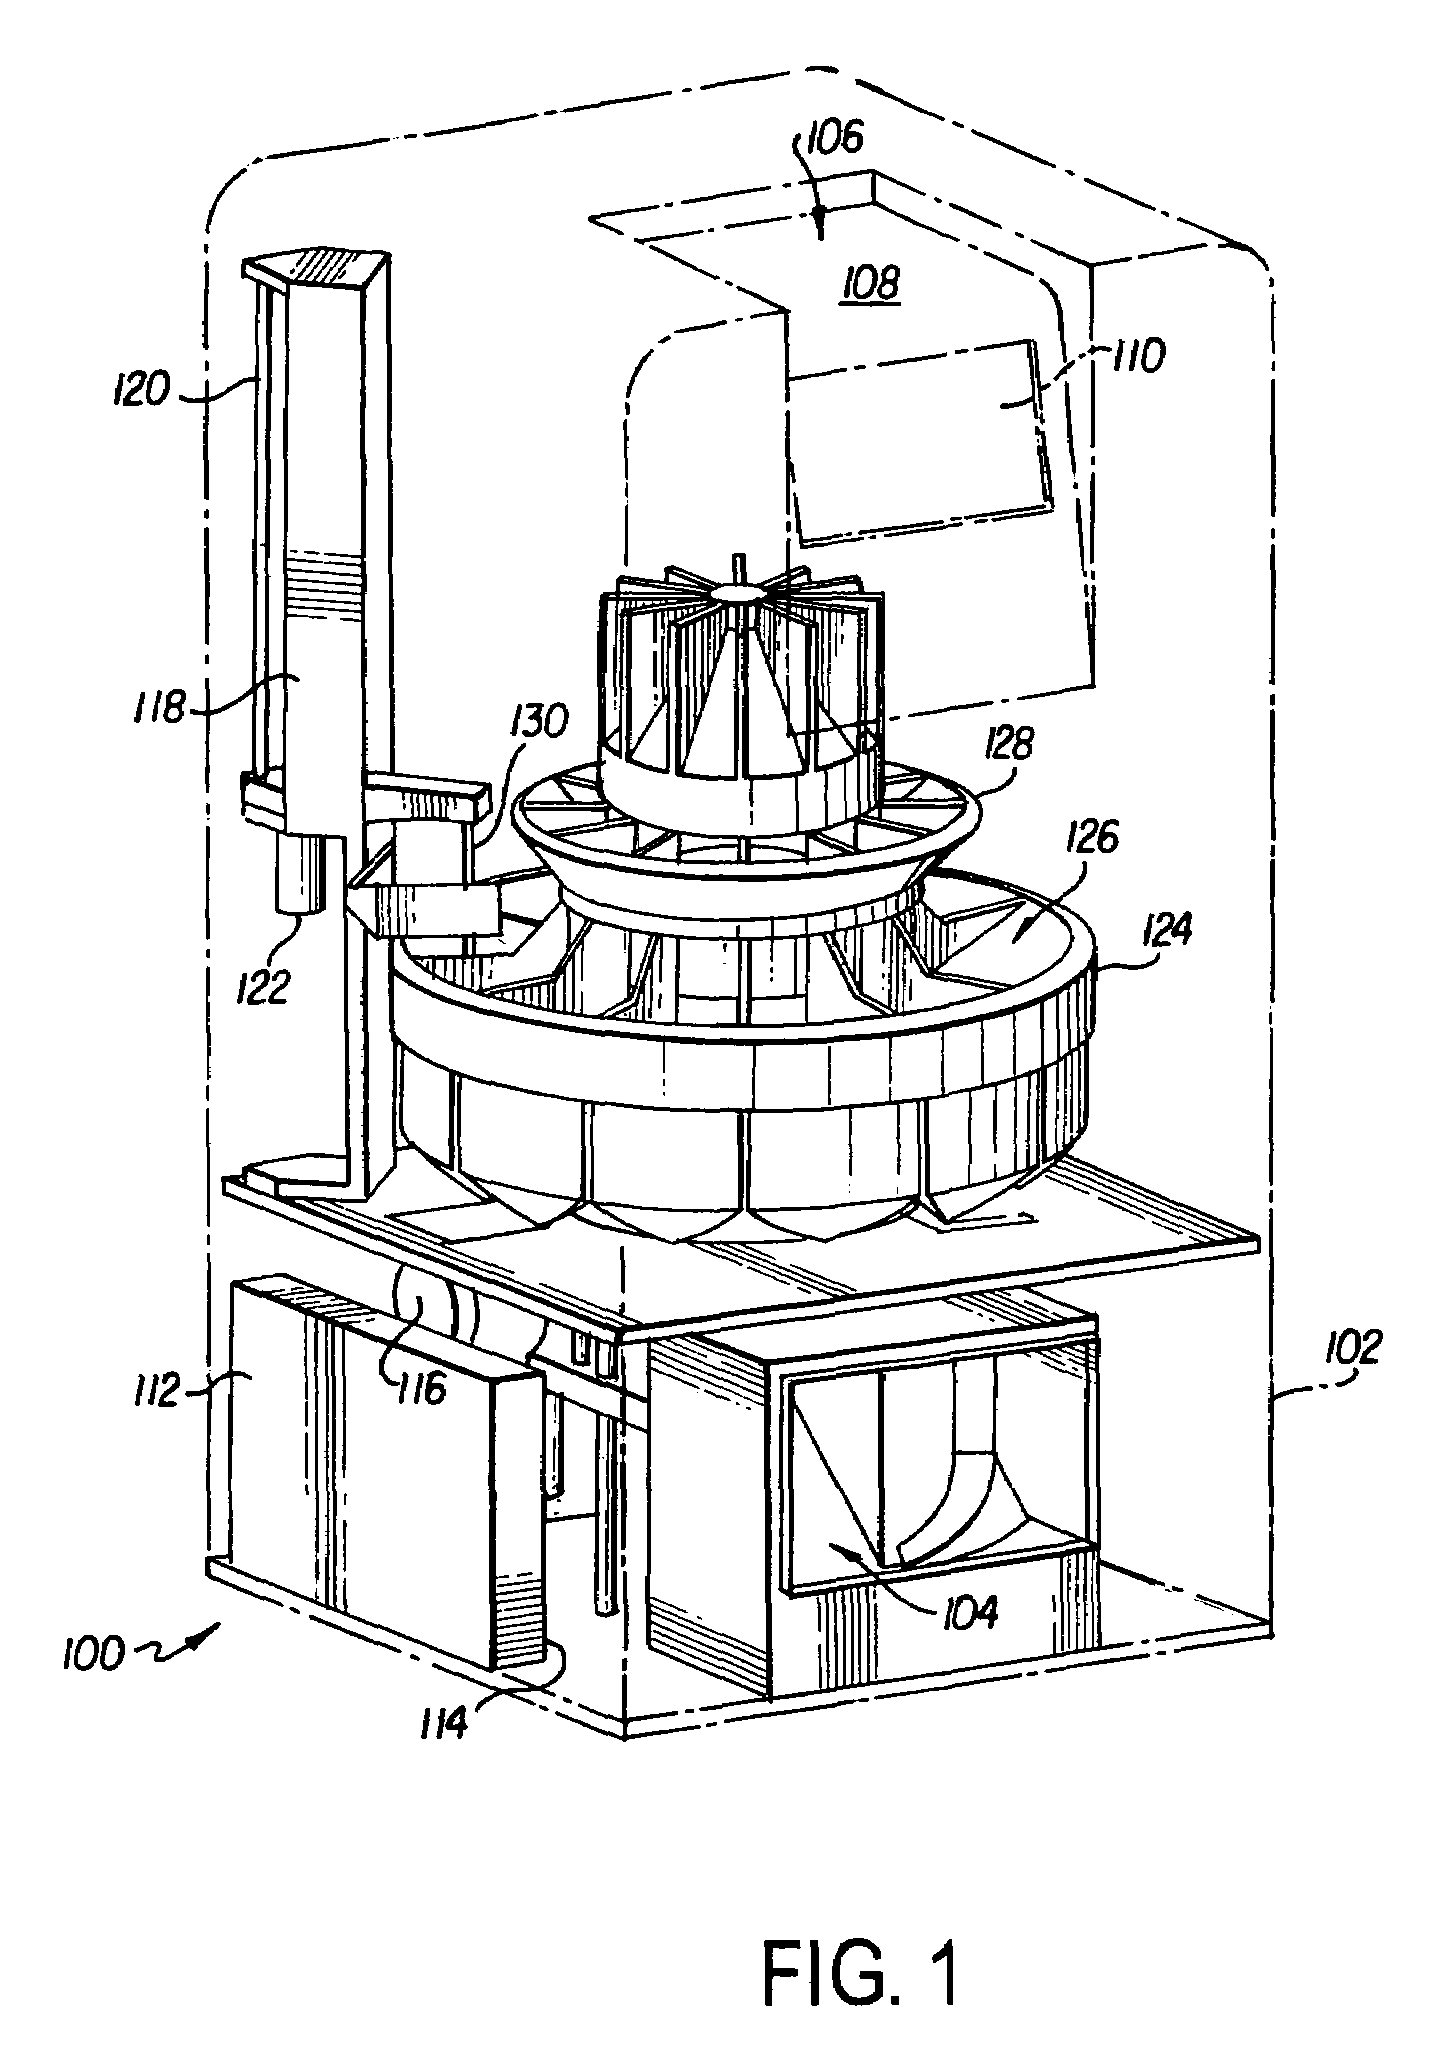 System and method for interactive items dispenser